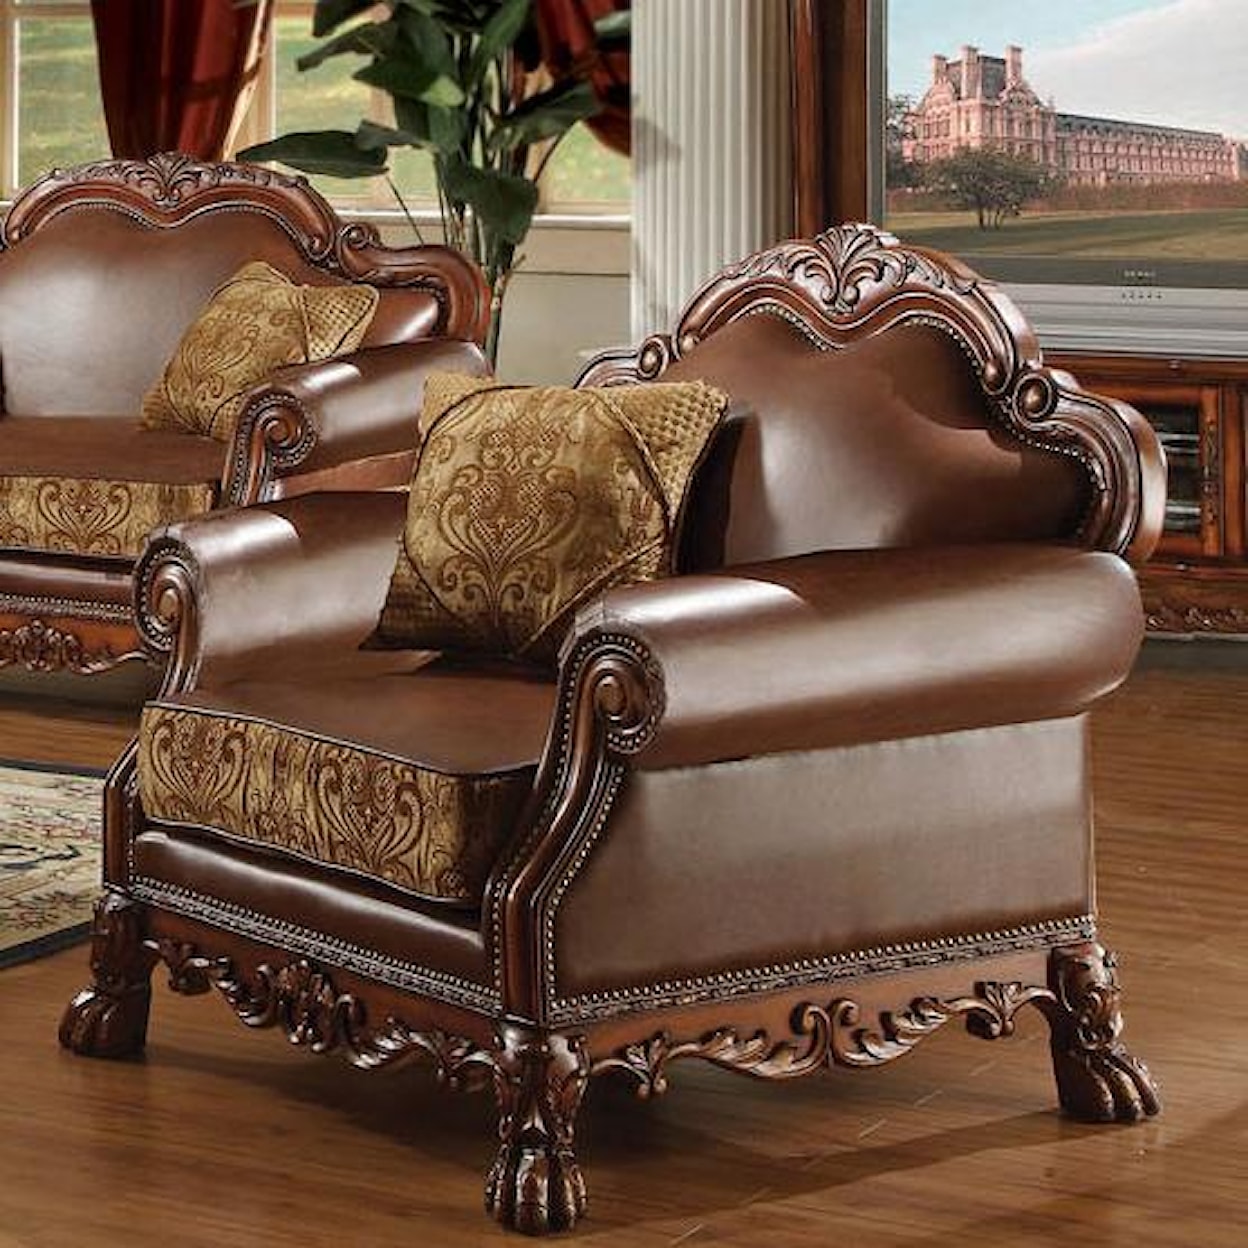 Acme Furniture Dresden II Chair with 1 Pillow